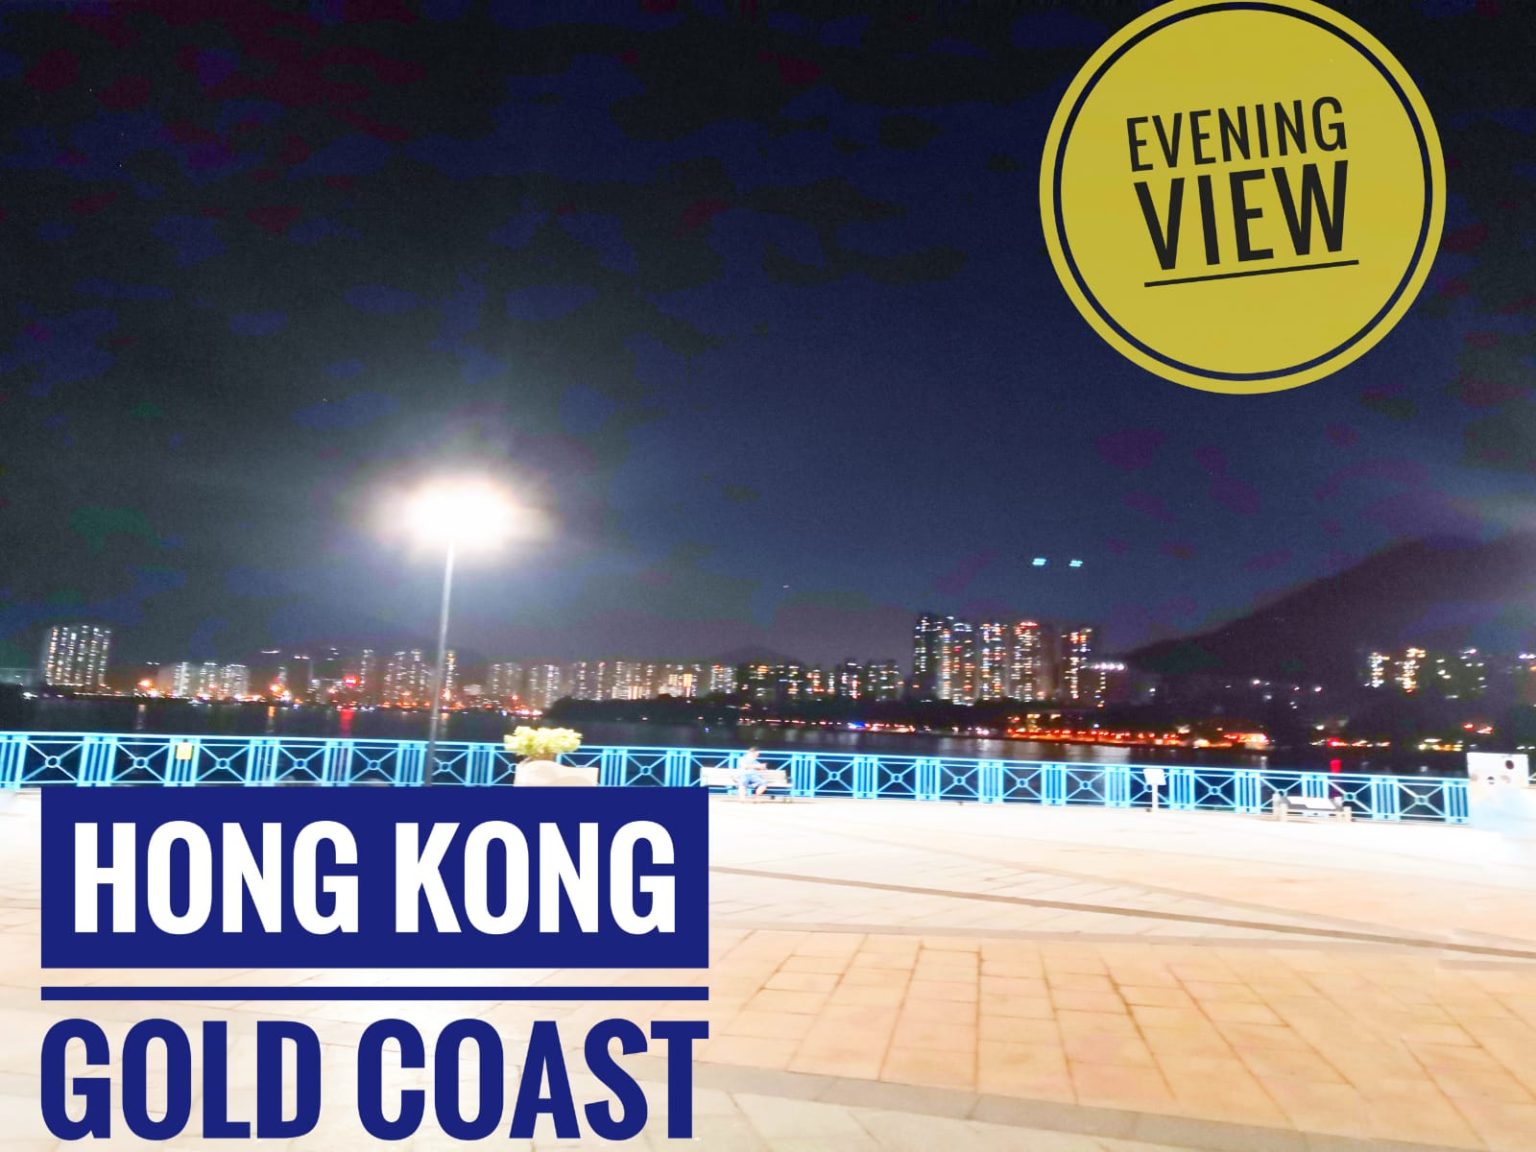 Gold coast is a proper residential area in NT Gold Coast Hong Kong ...